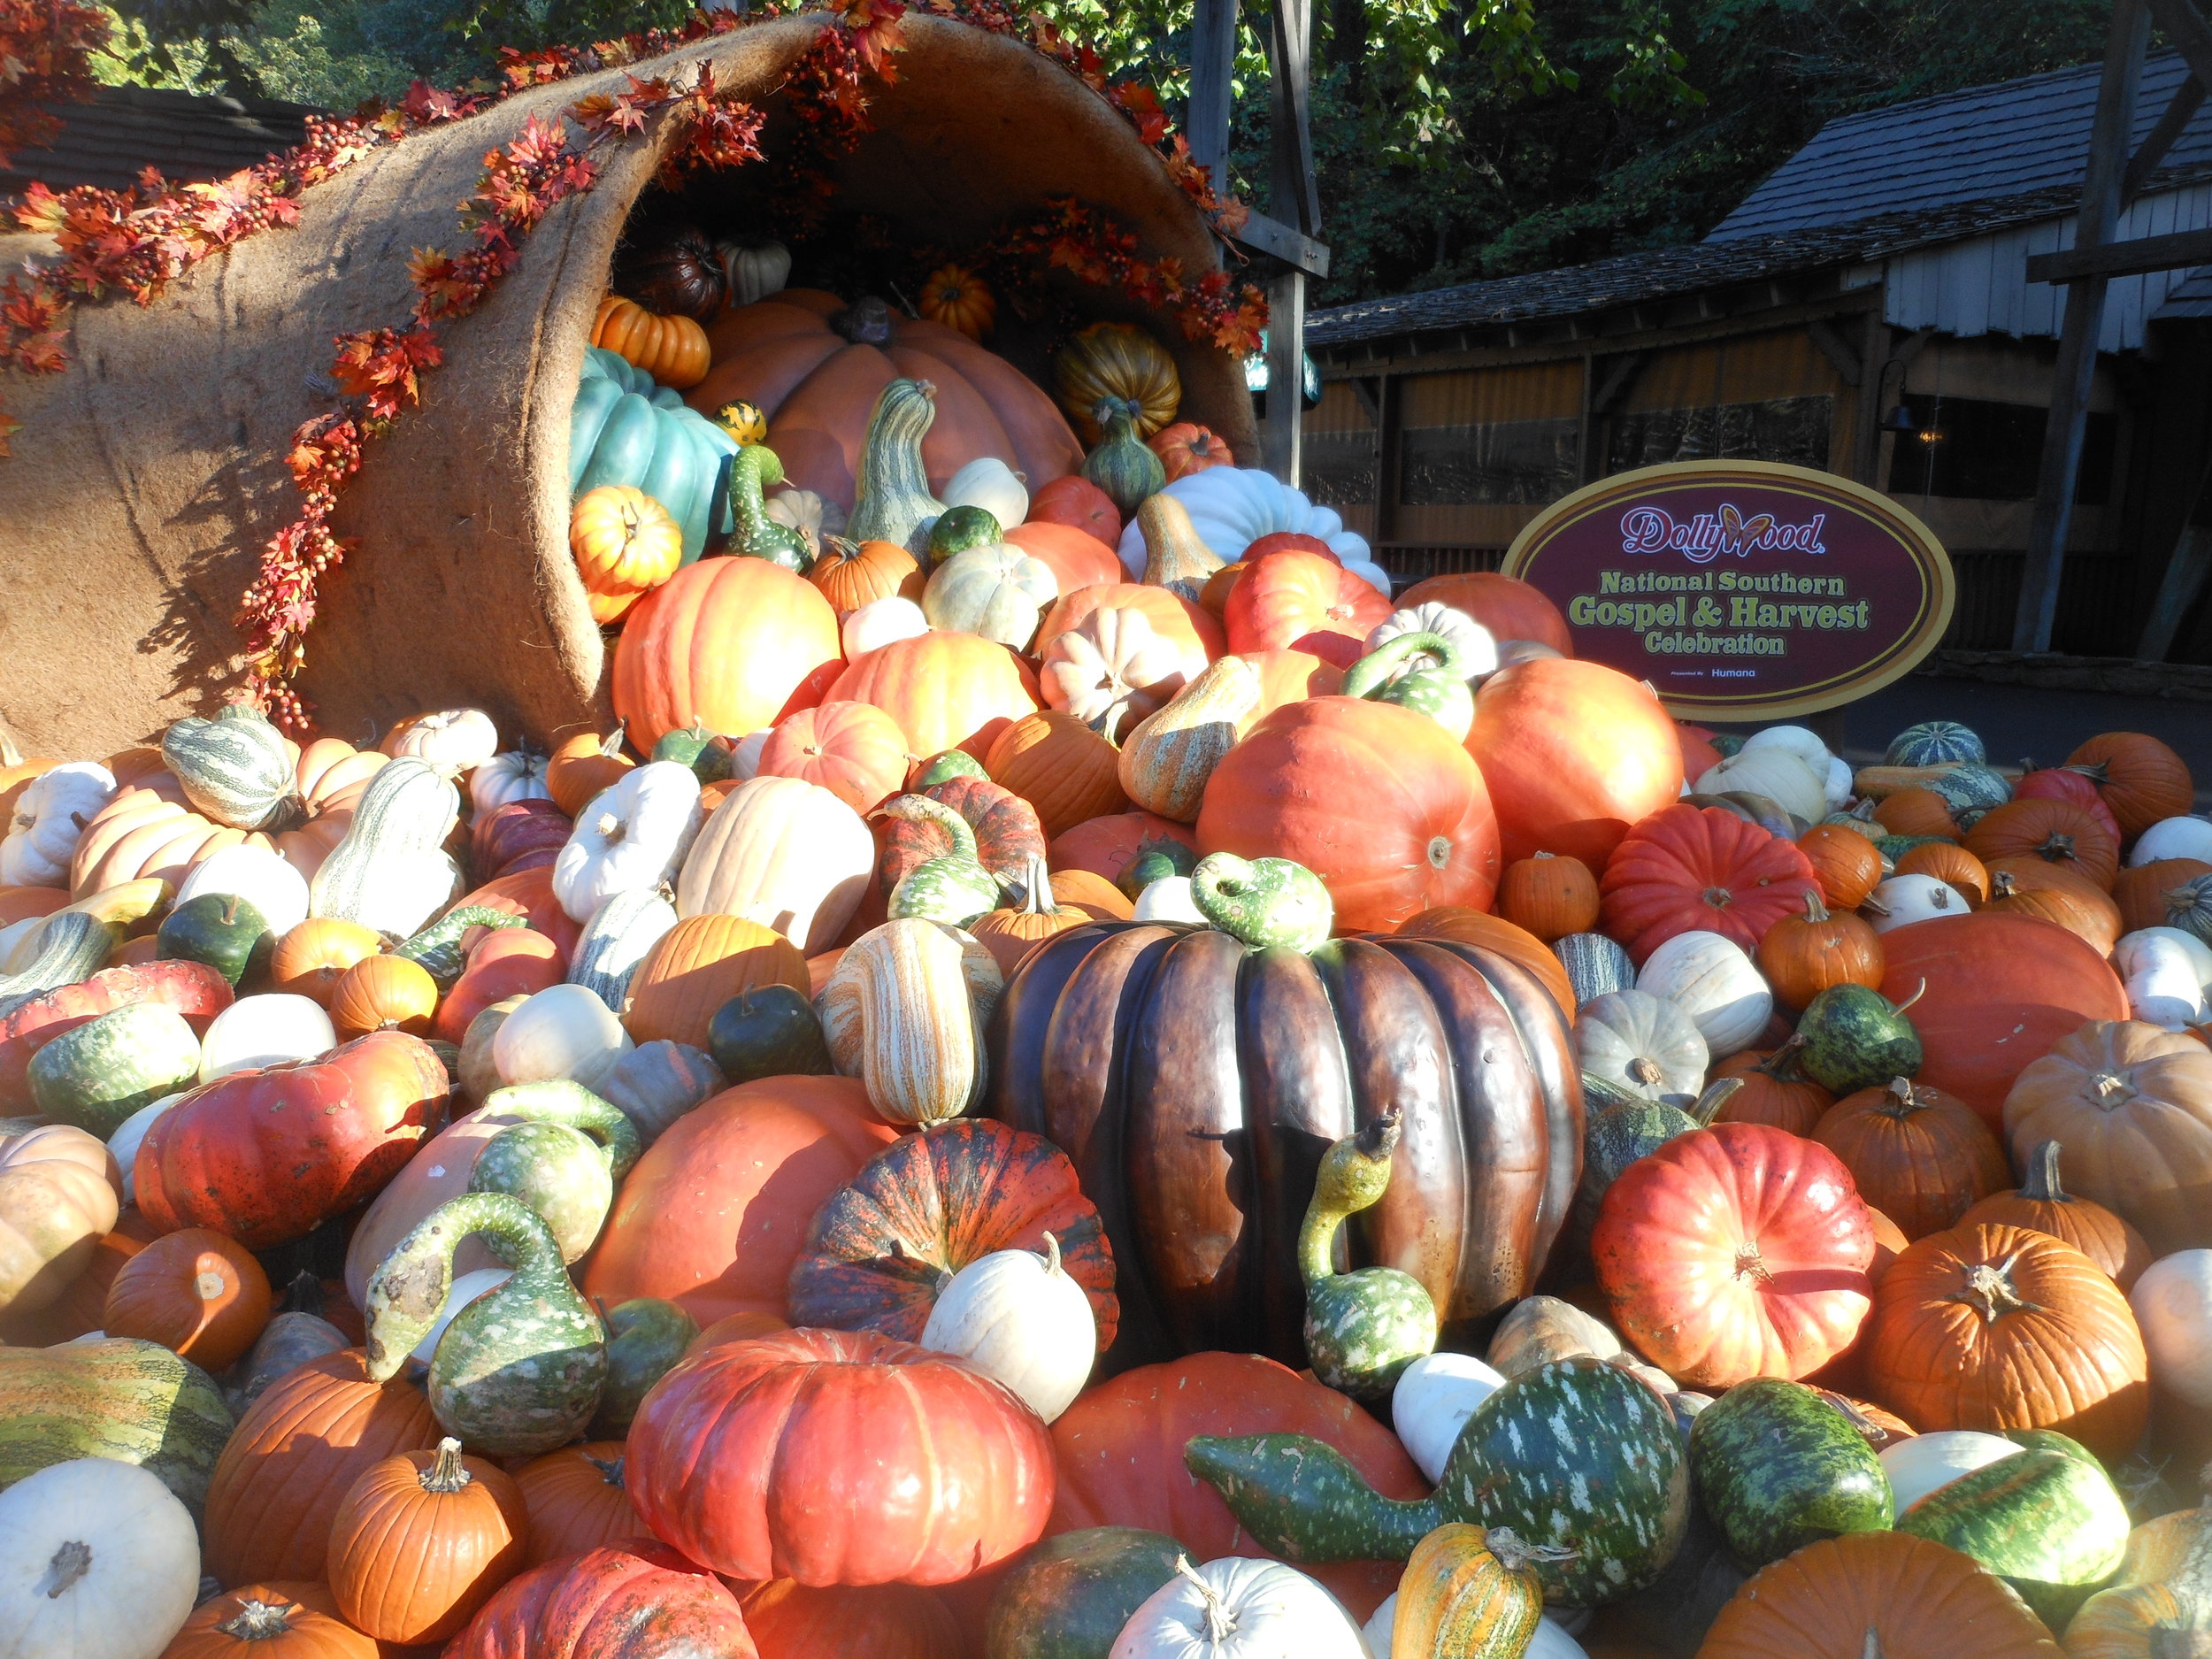  During the Harvest Festival the park is filled with wonderful displays like this one.&nbsp; 